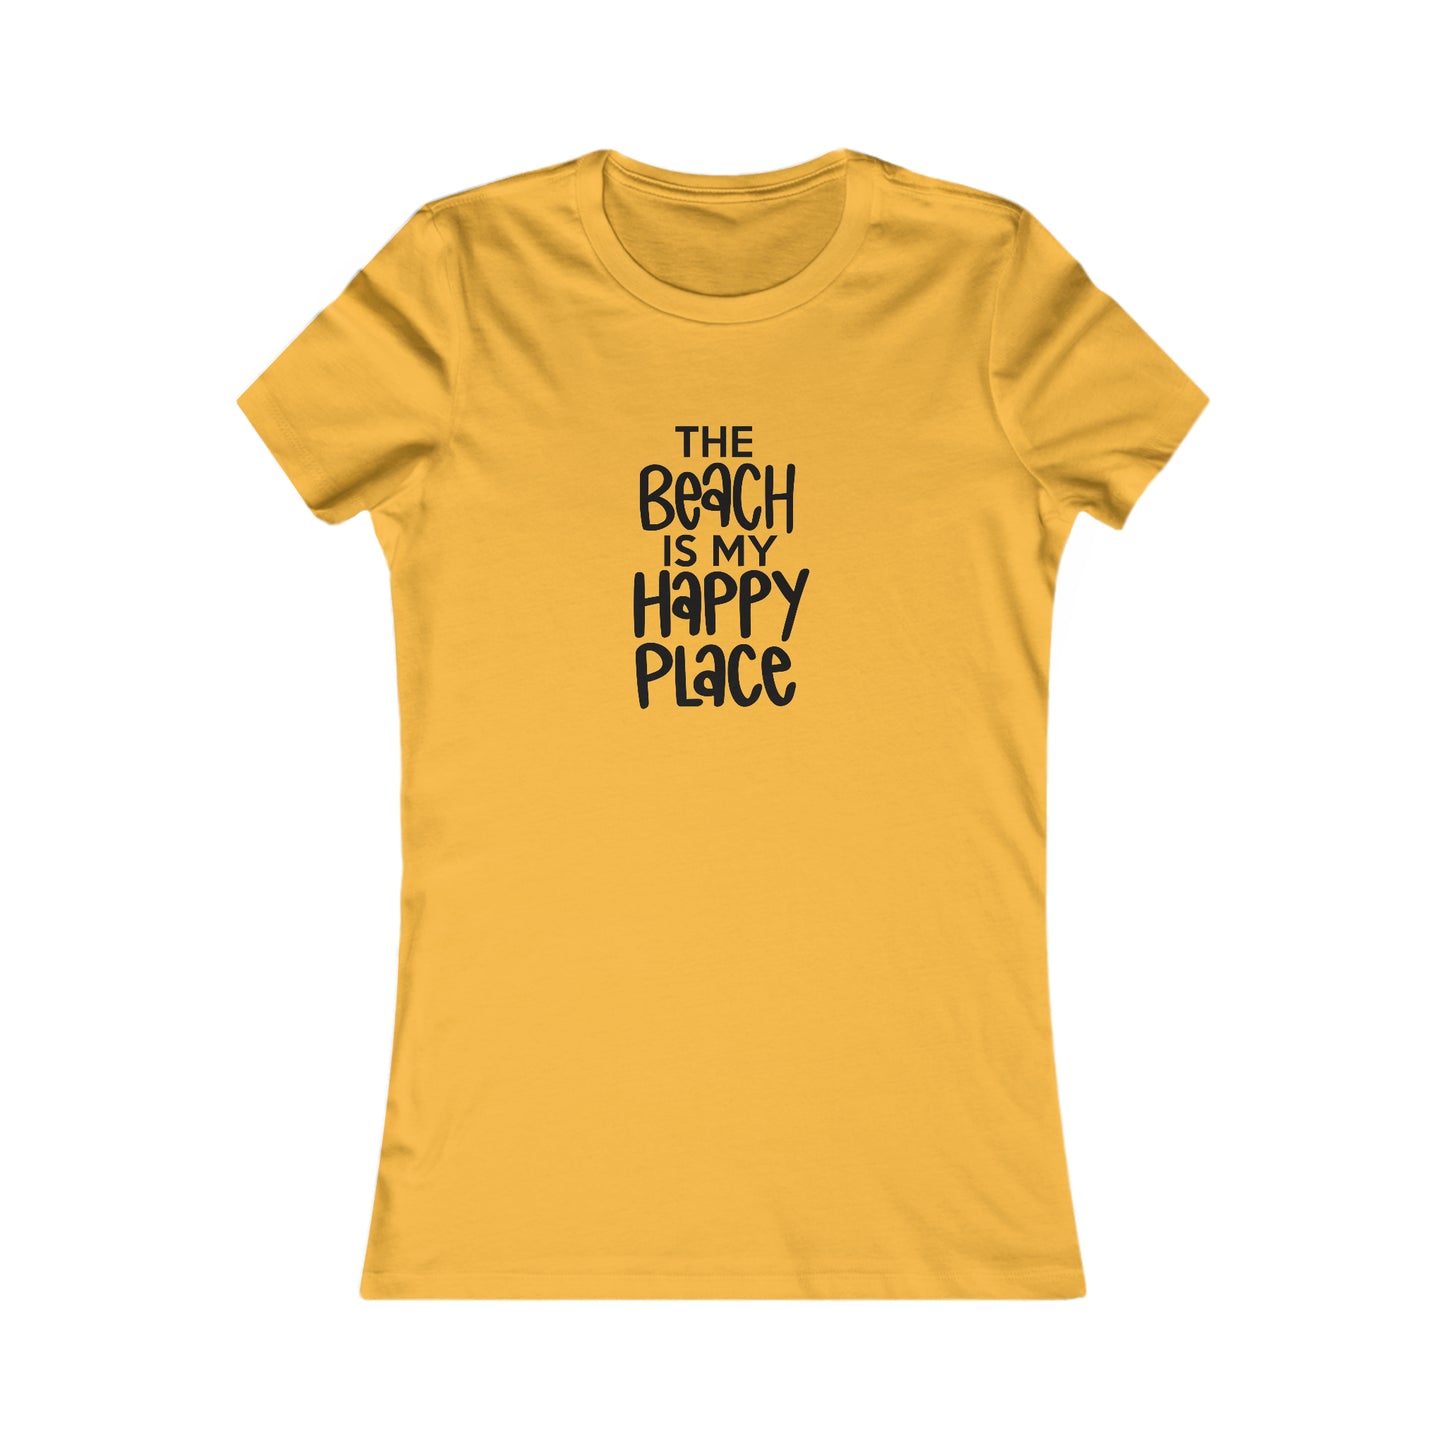 The Beach is My Happy Place - Women's Favorite Tee -